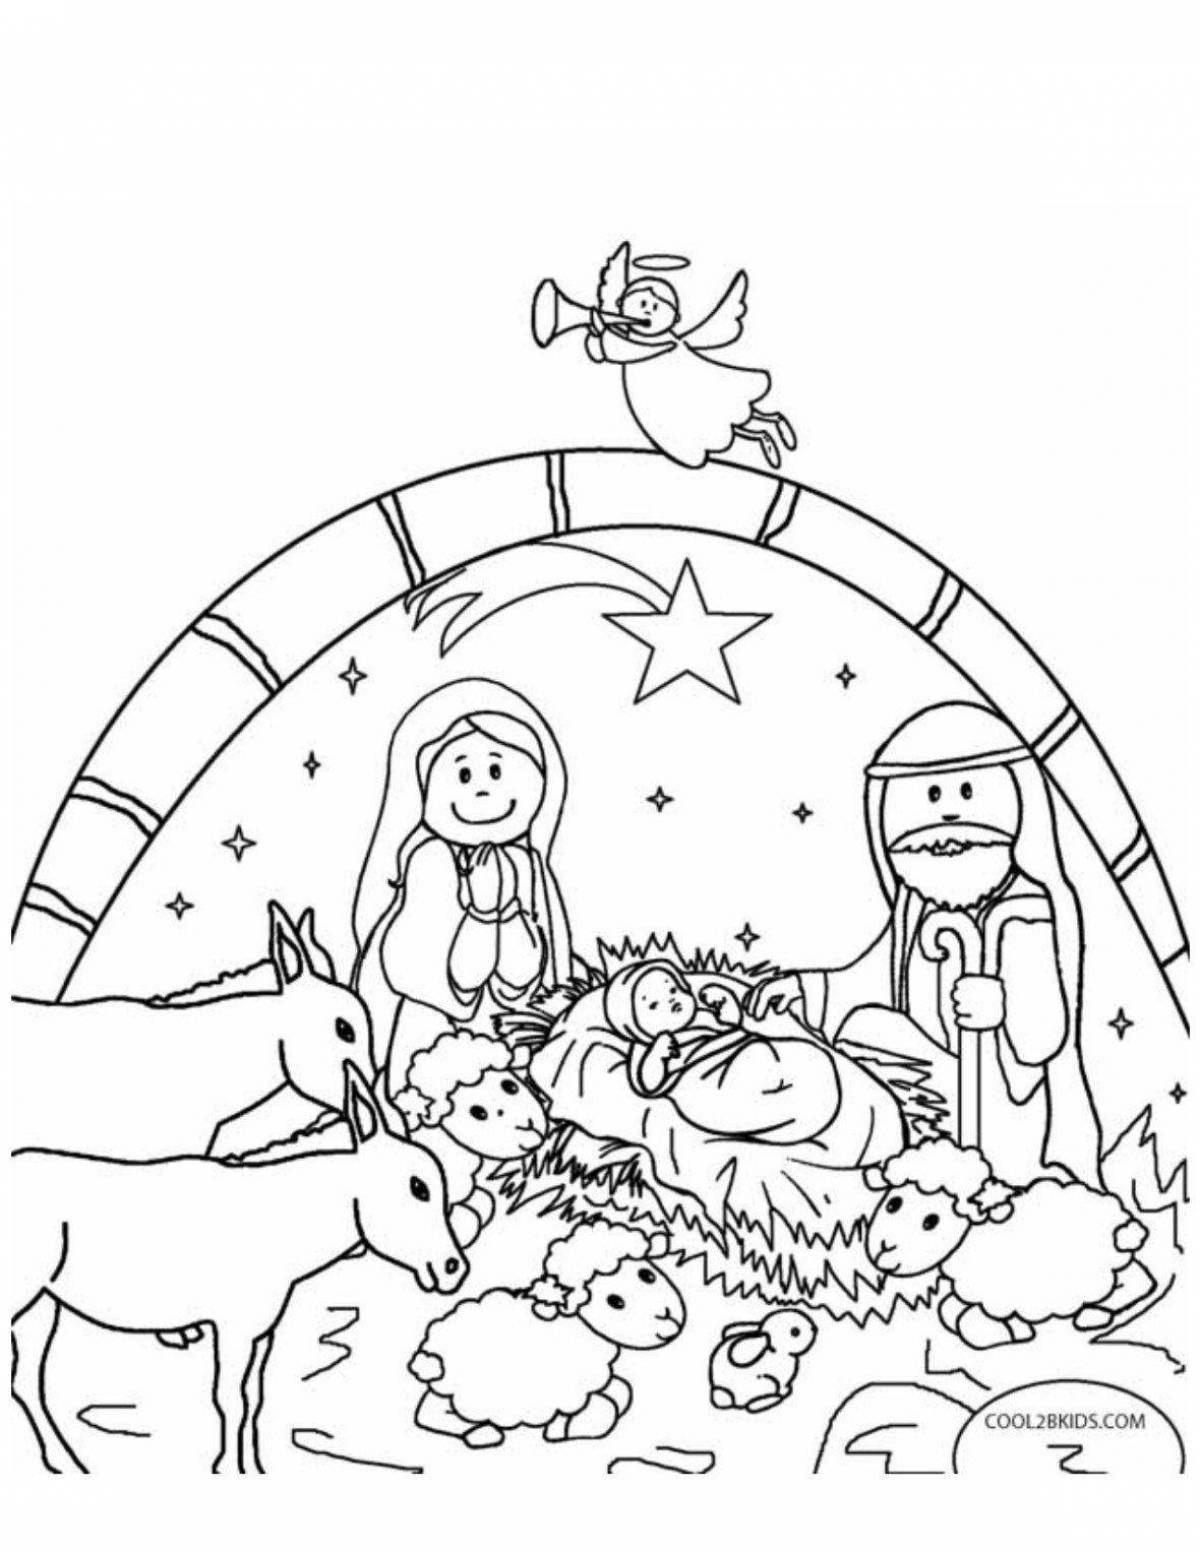 Christmas coloring pictures for kids